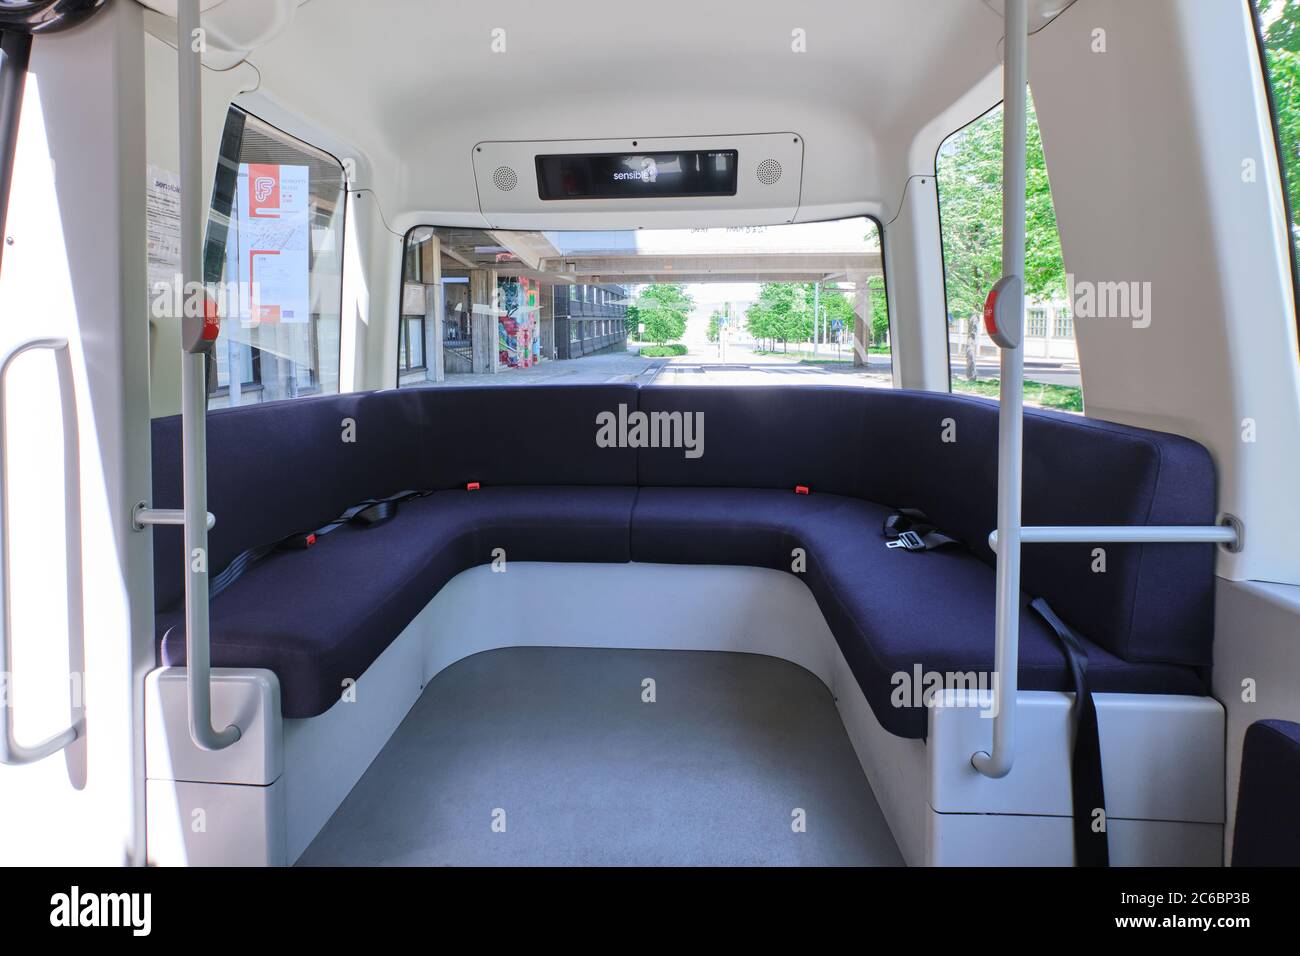 Helsinki, Finland - June 12, 2020: The FABULOS Project - testing self-driving bus in city street in Pasila district. Bus interior. Stock Photo